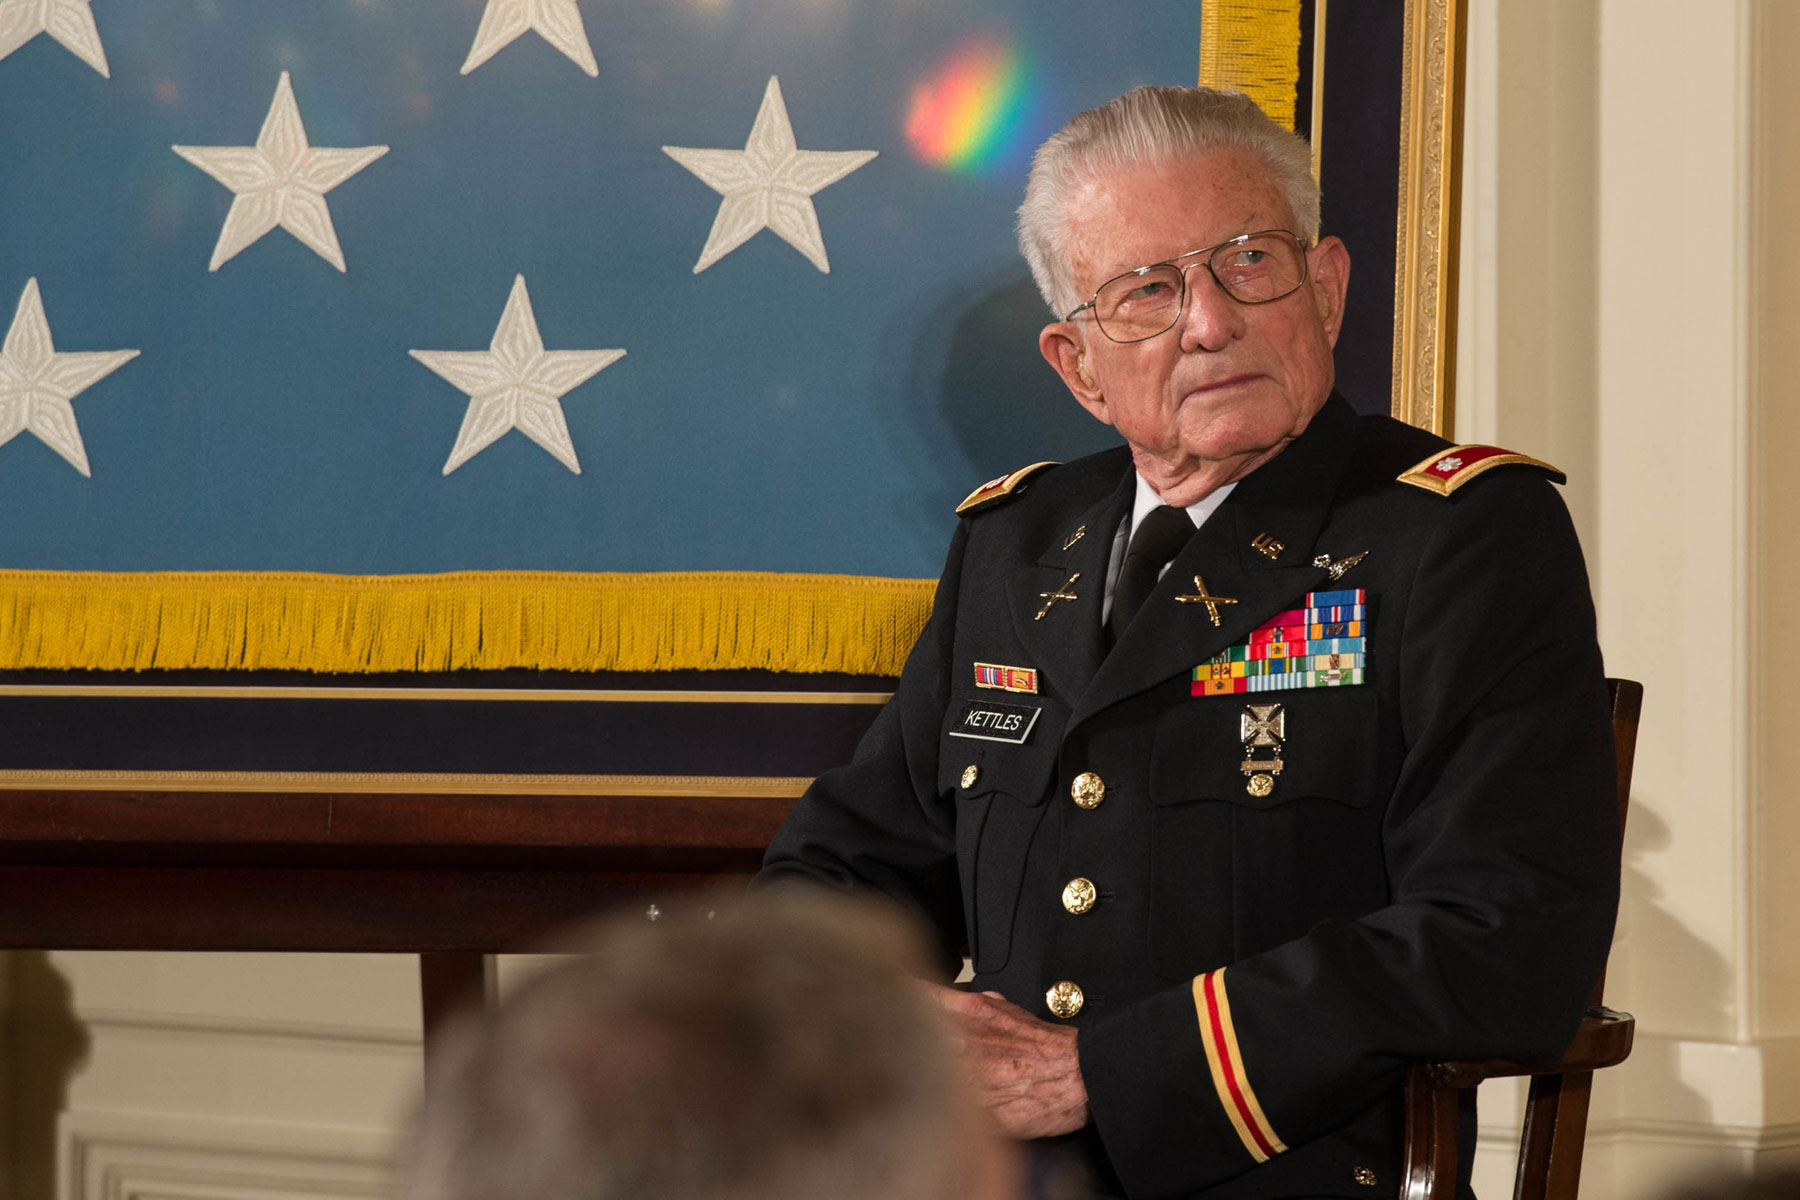 do medal of honor recipients get health insurance